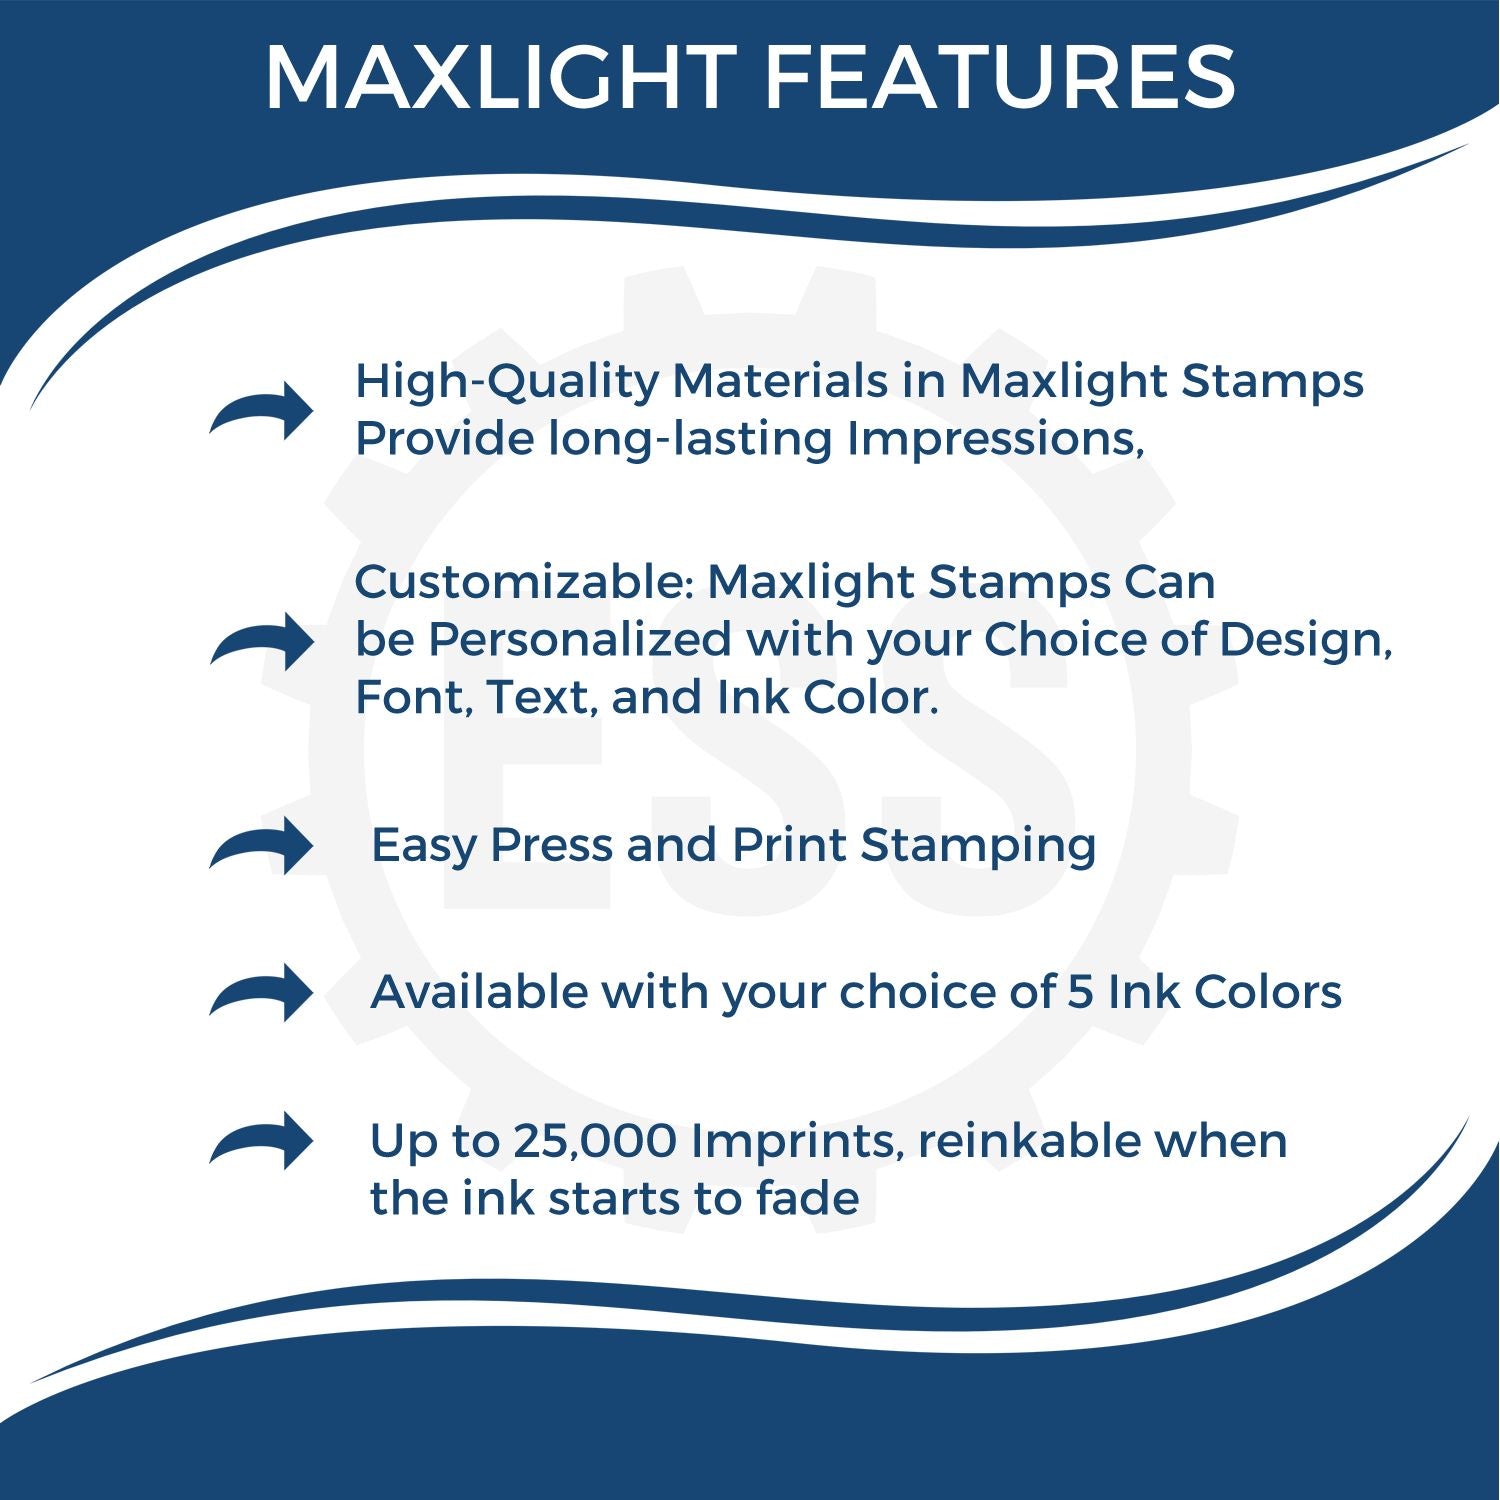 Premium MaxLight Pre-Inked Tennessee Architectural Stamp